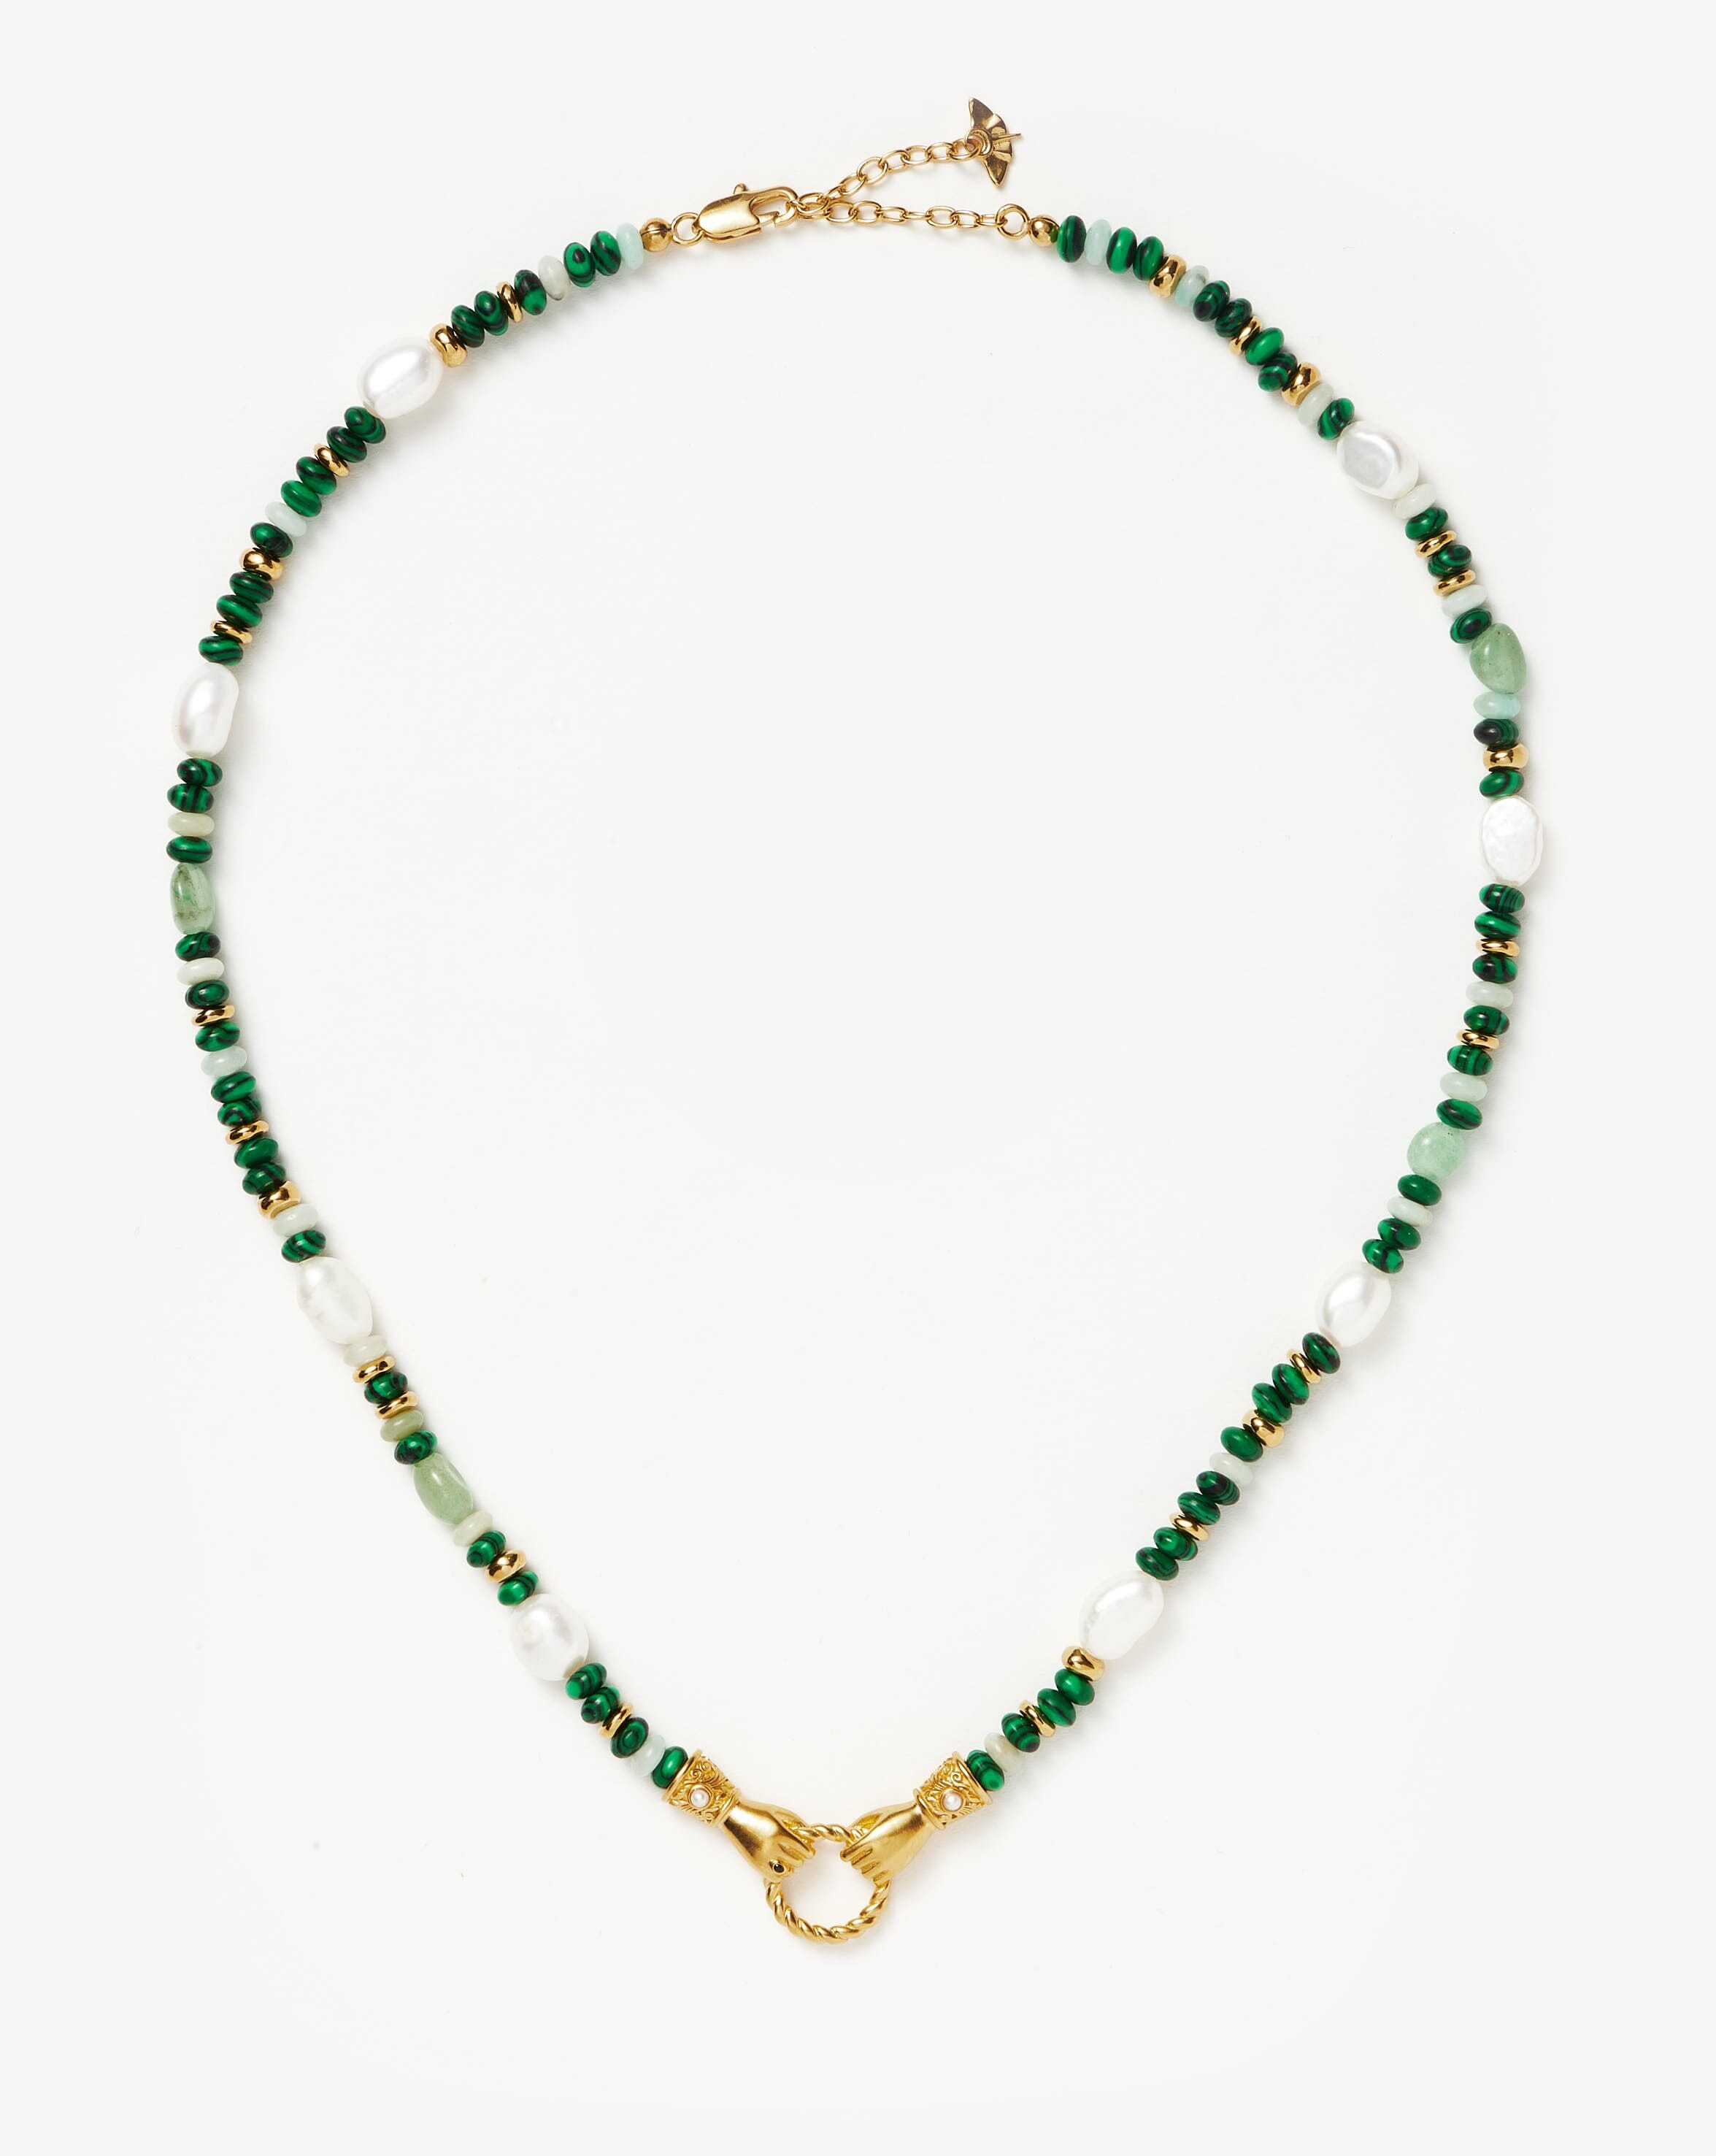 harris reed in good hands beaded gemstone necklace 18ct gold platedmulti green gemstone pearl necklaces missoma 469992